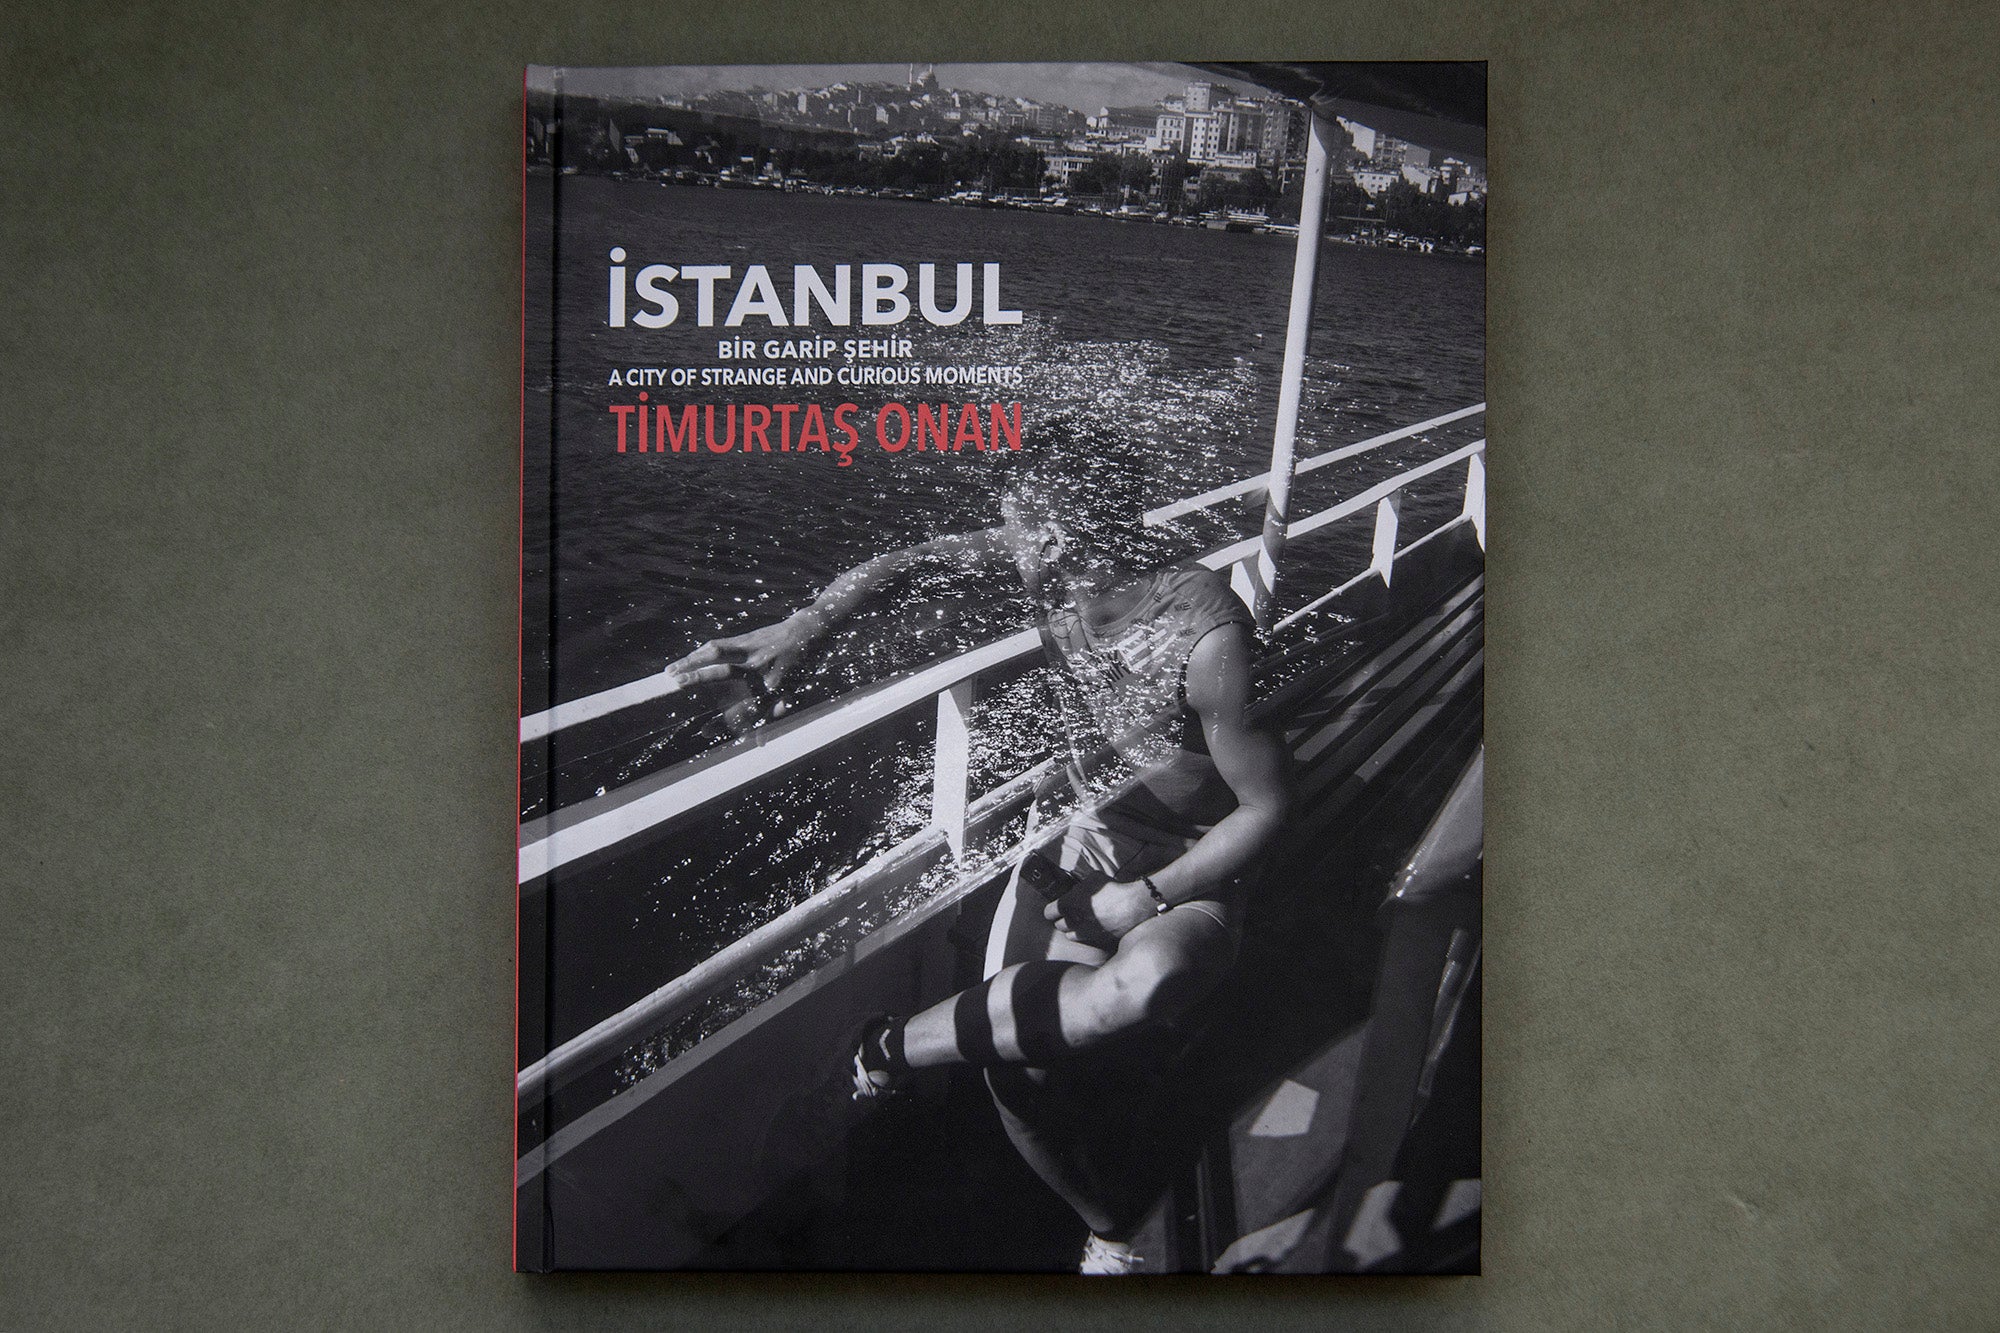 İstanbul: A City of Strange and Curious Moments - Timurtaş Onan